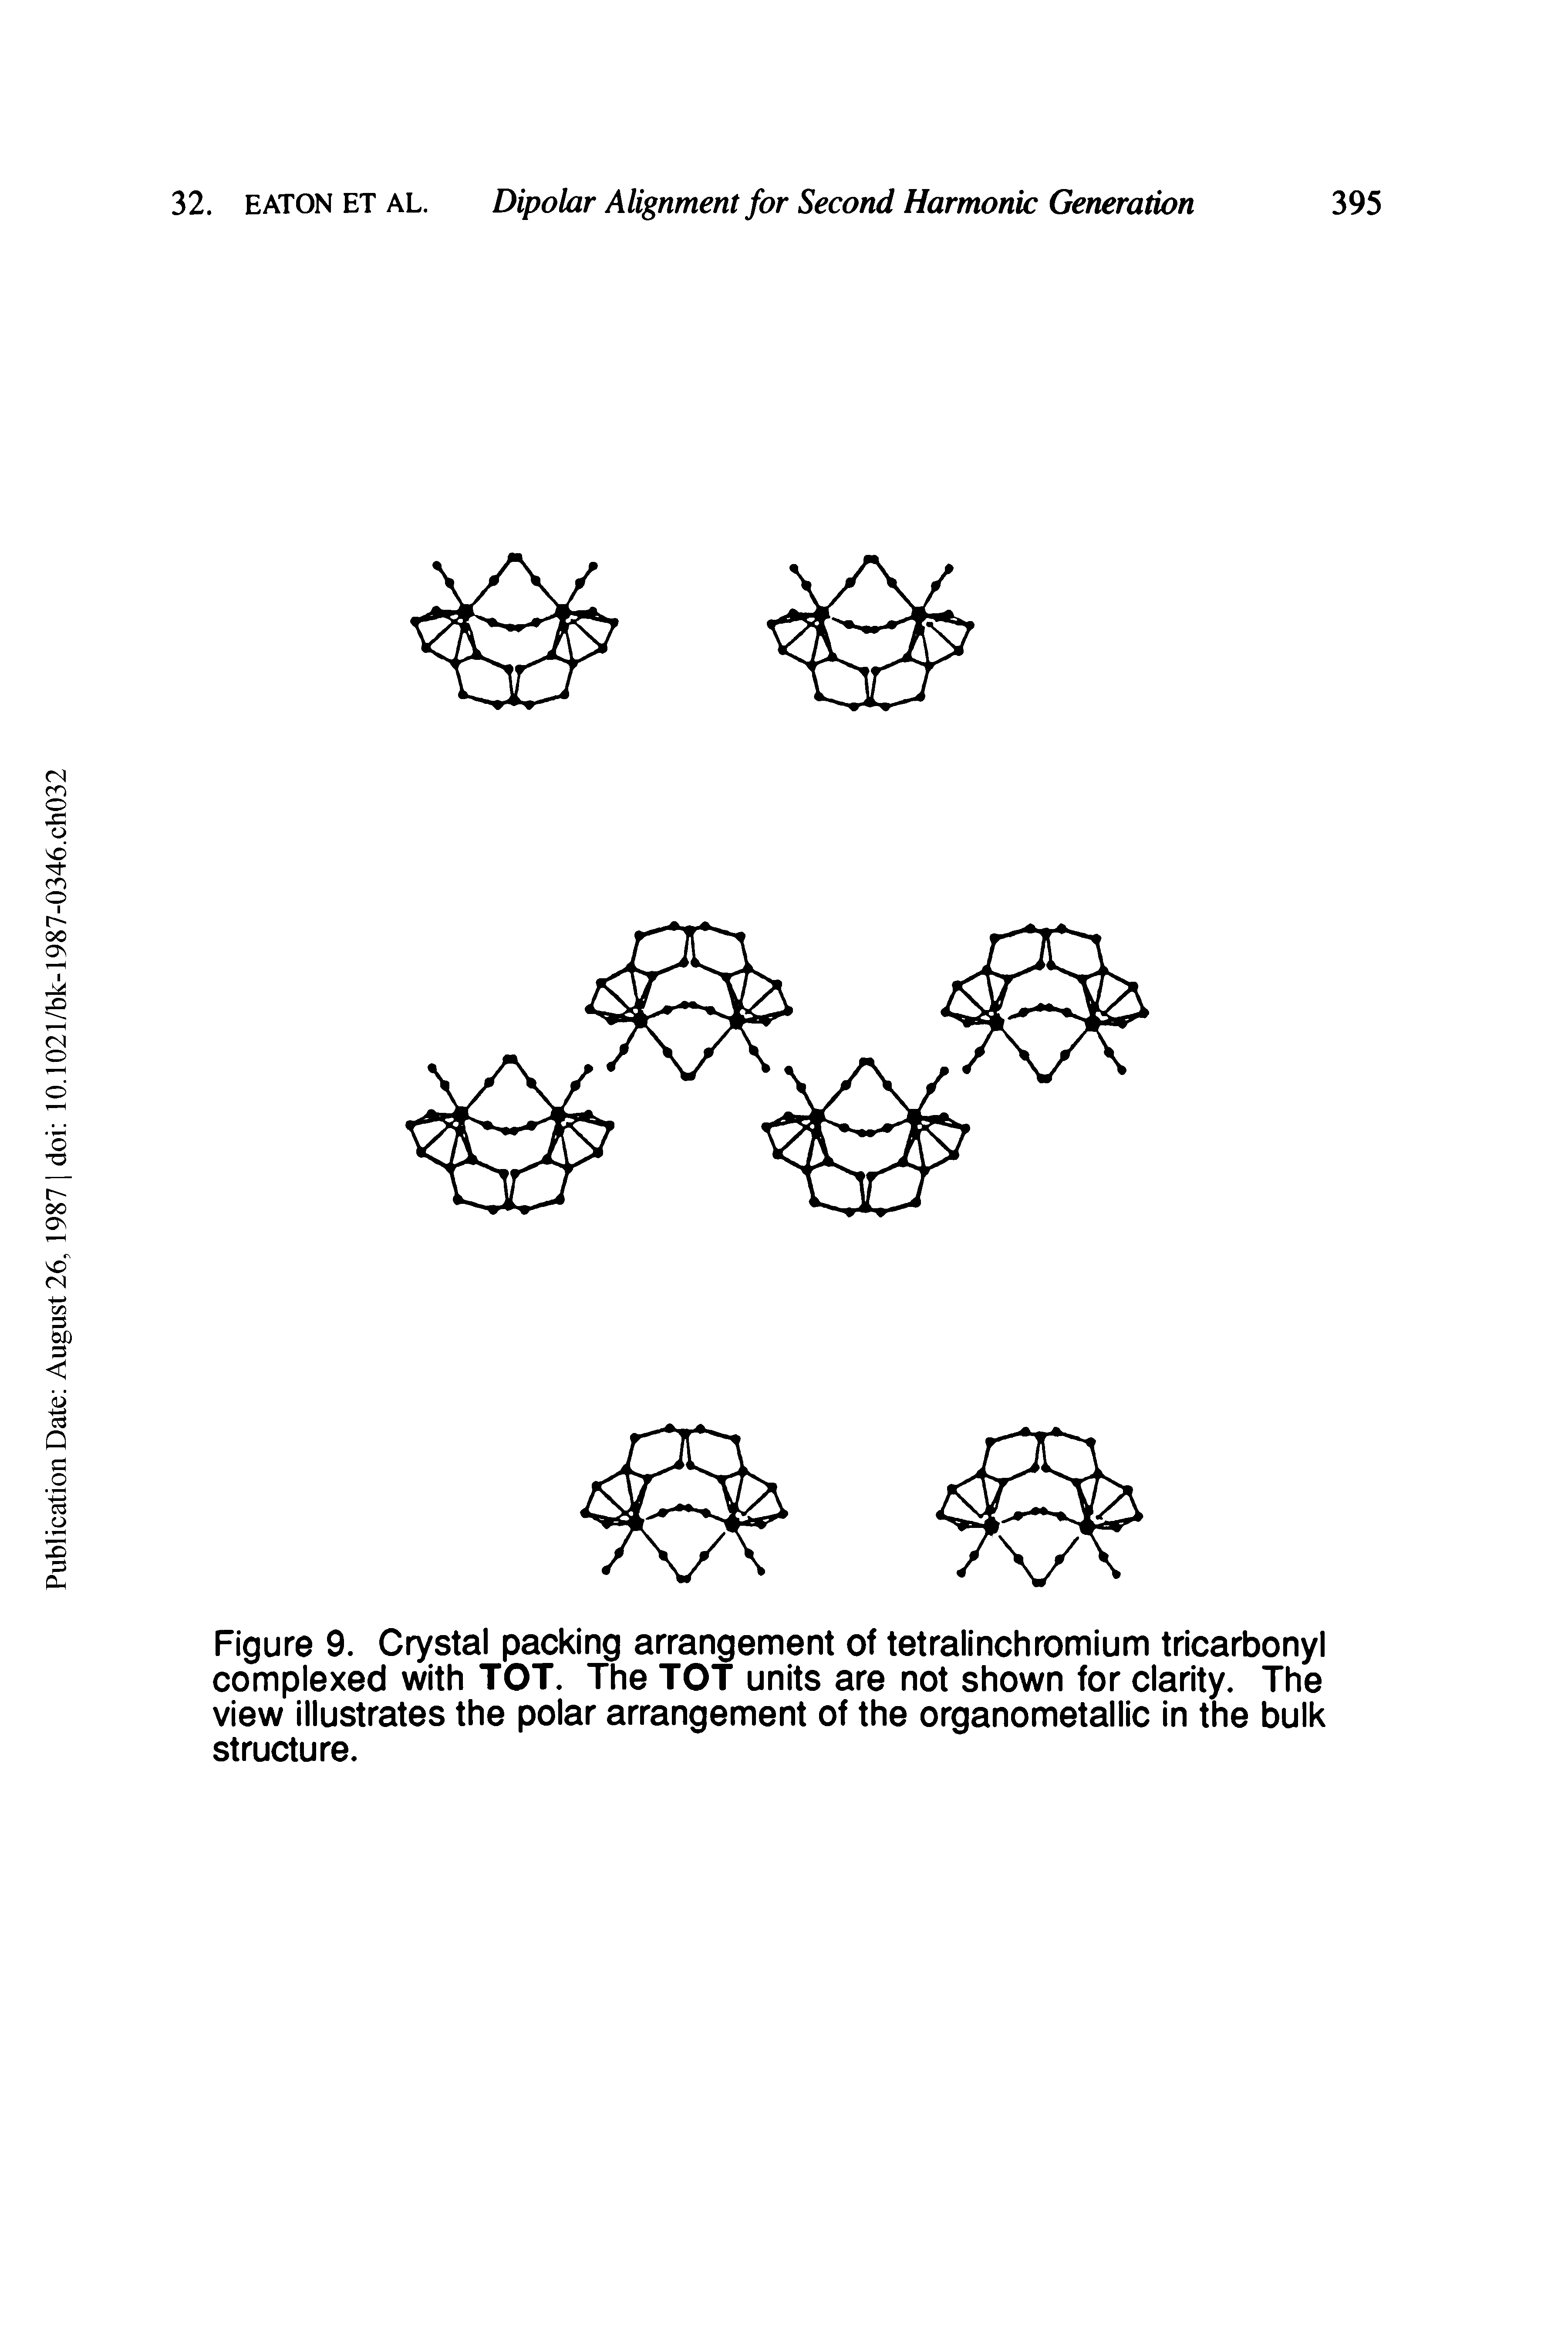 Figure 9. Crystal packing arrangement of tetralinchromium tricarbonyl complexed with TOT. The TOT units are not shown for clarity. The view illustrates the polar arrangement of the organometallic in the bulk structure.